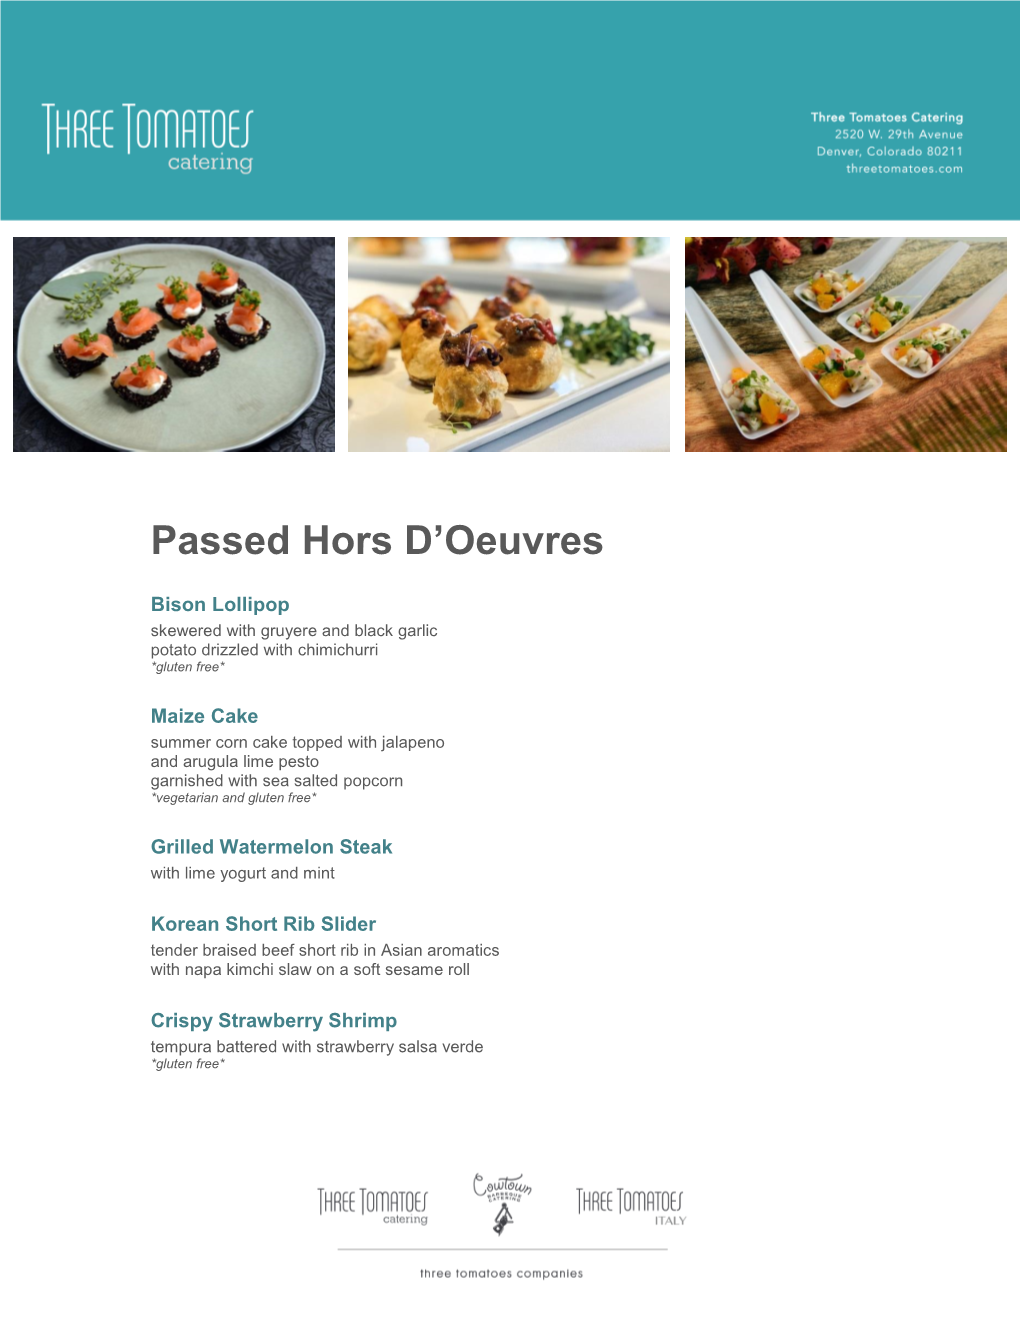 Passed Hors D'oeuvres